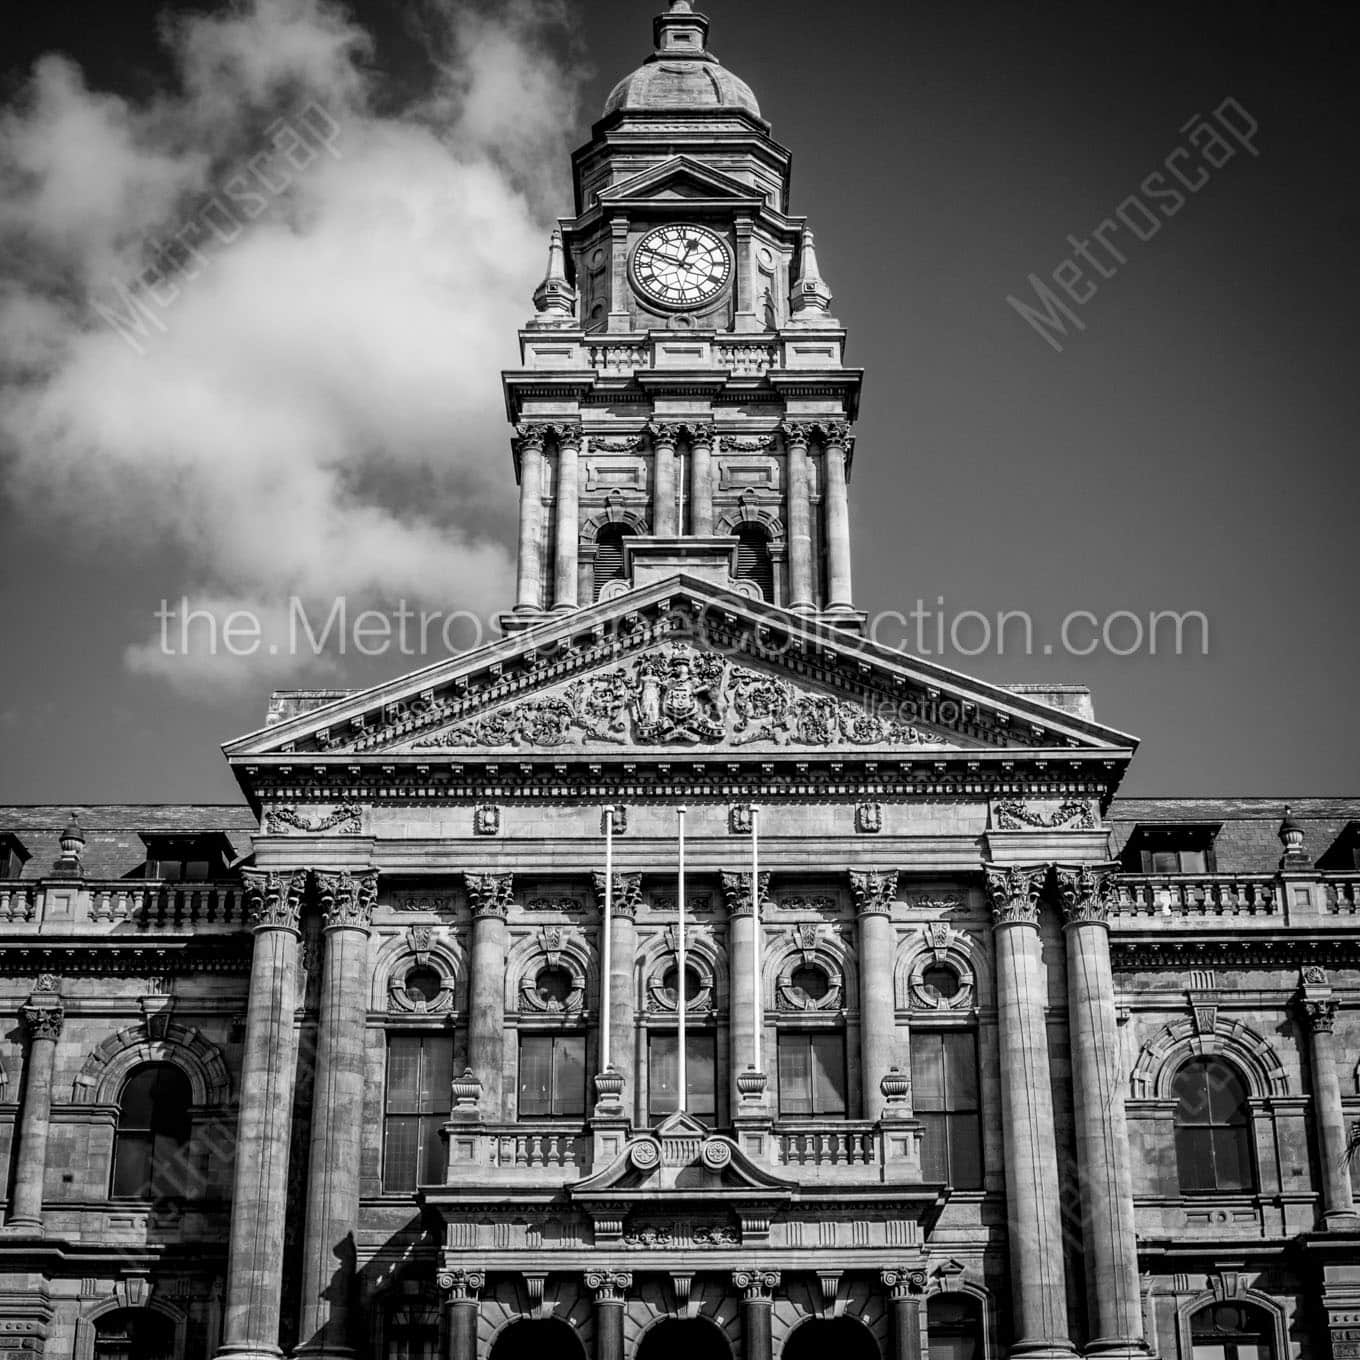 cape town city hall building Black & White Wall Art